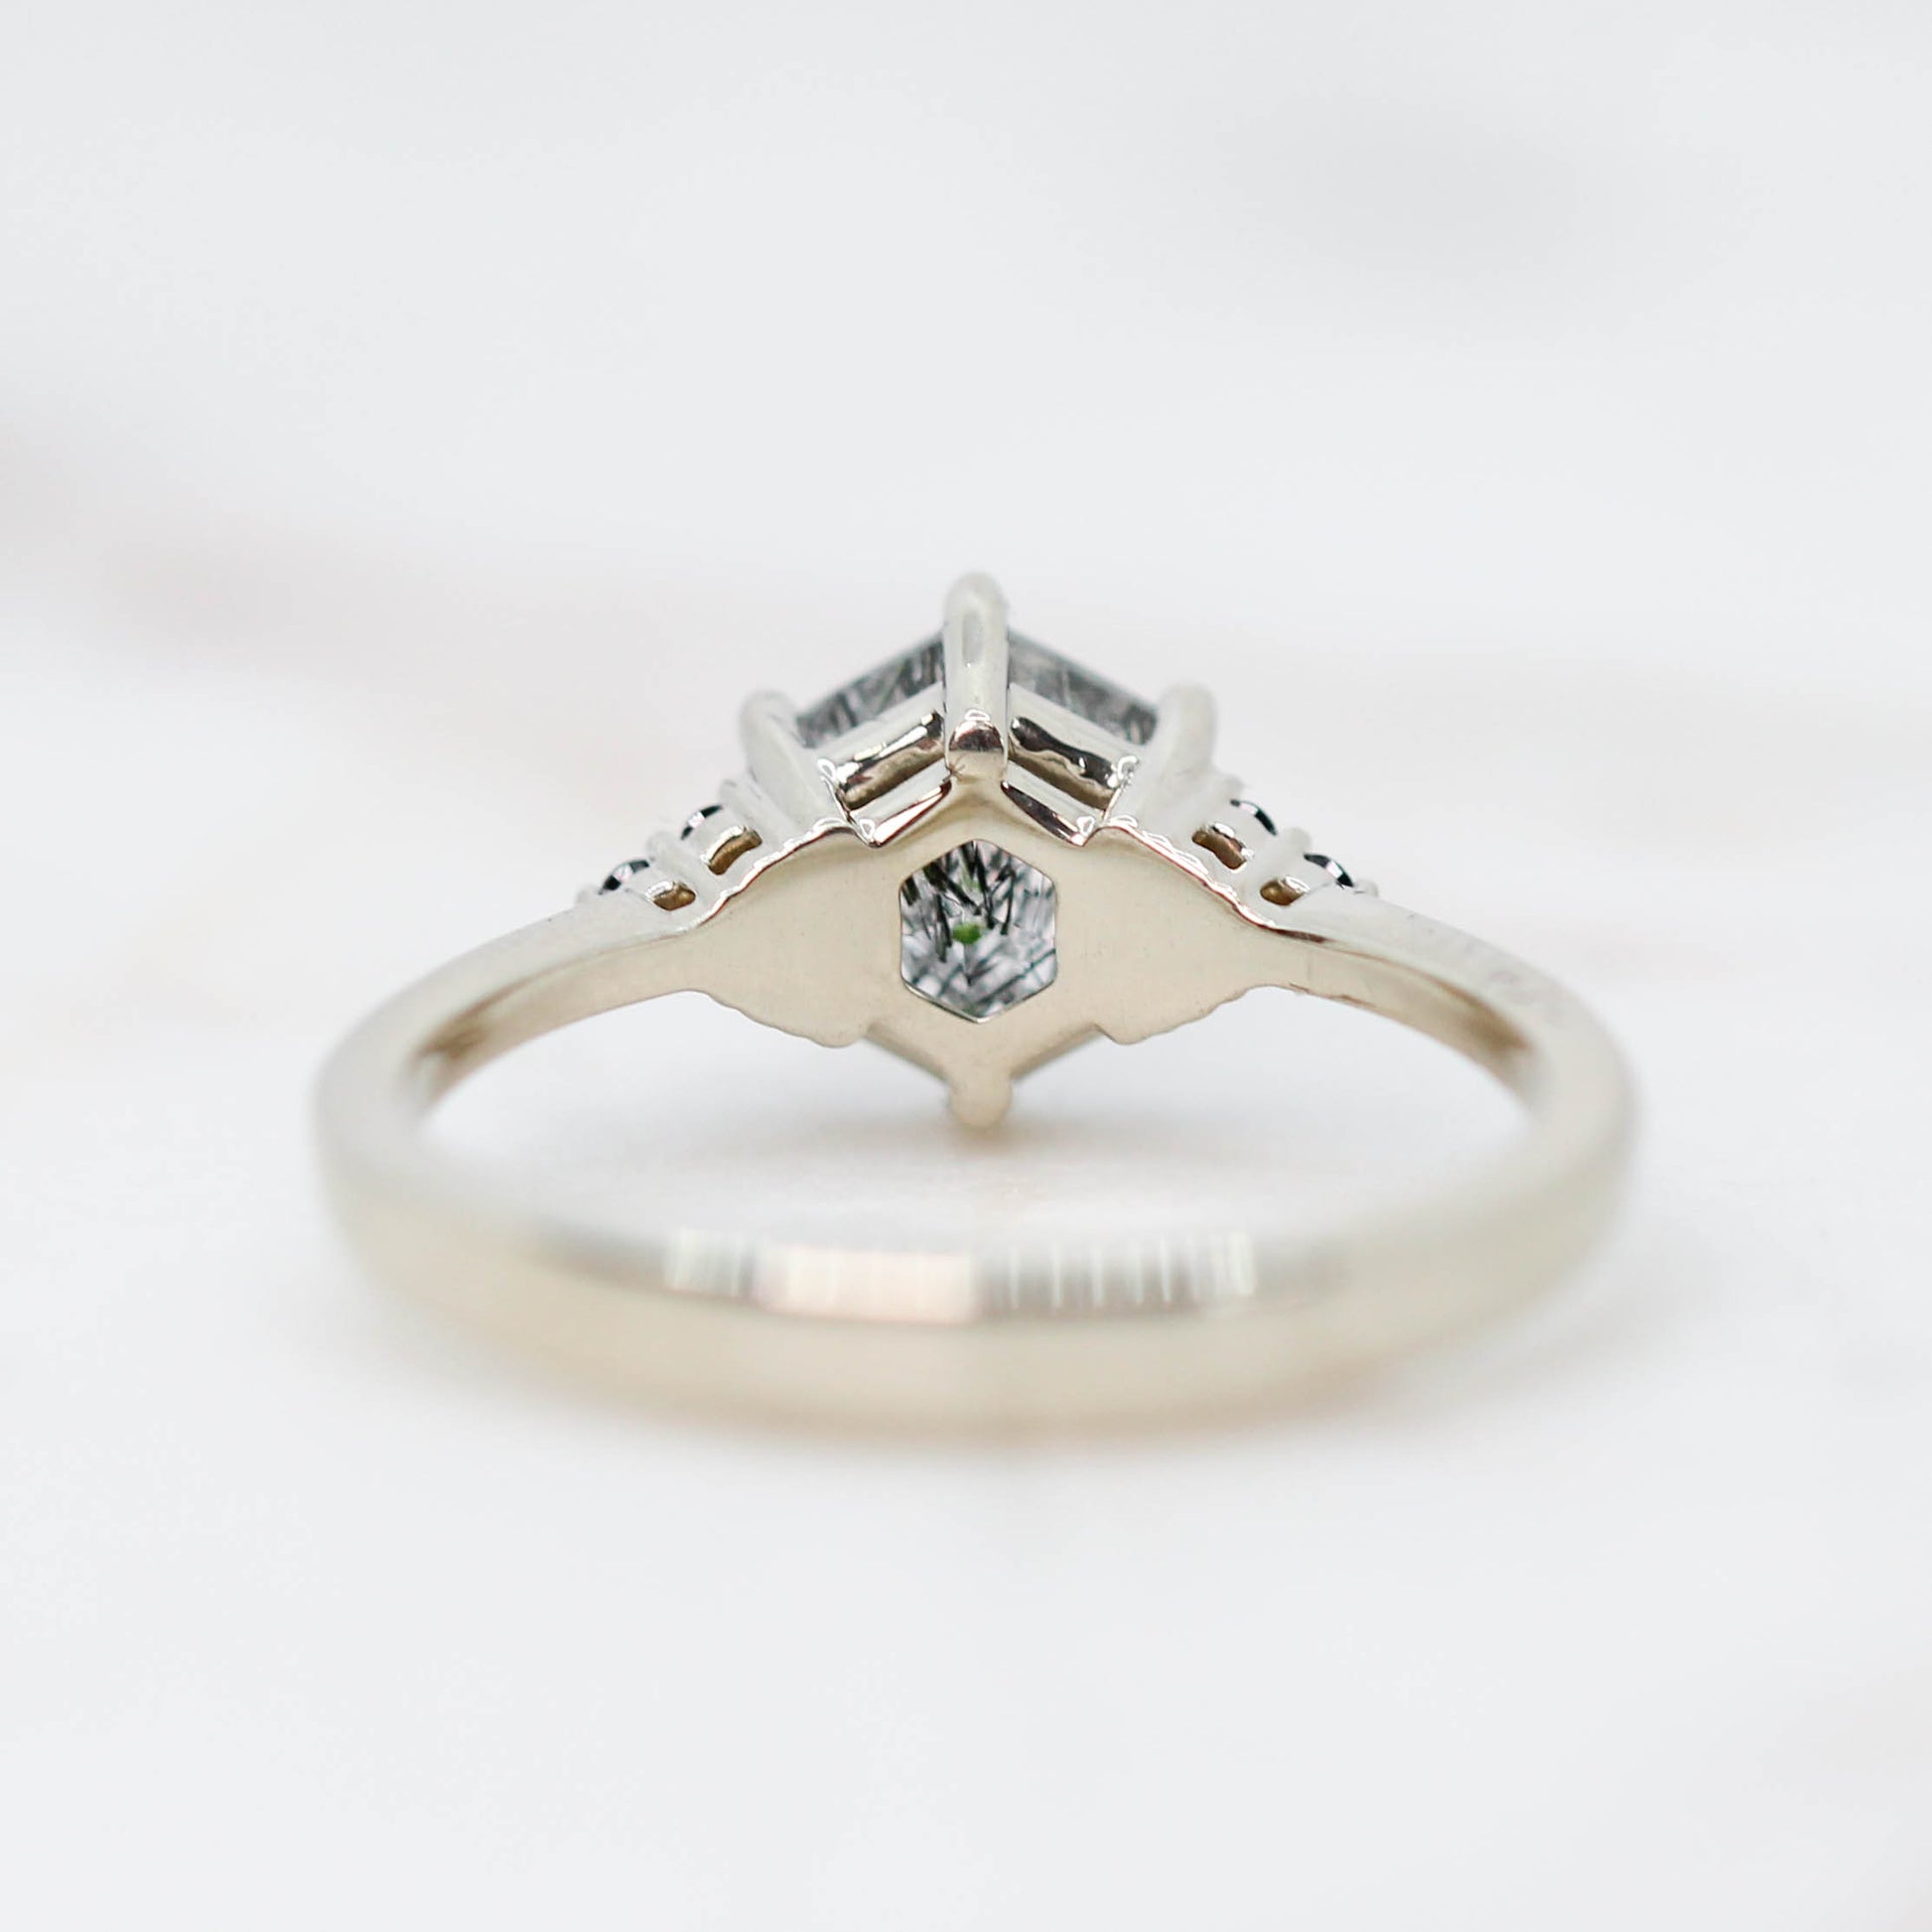 Customize Yours - Imogene Ring with a 6.5mm Hexagon Tourmalinated Quartz - Midwinter Co. Alternative Bridal Rings and Modern Fine Jewelry